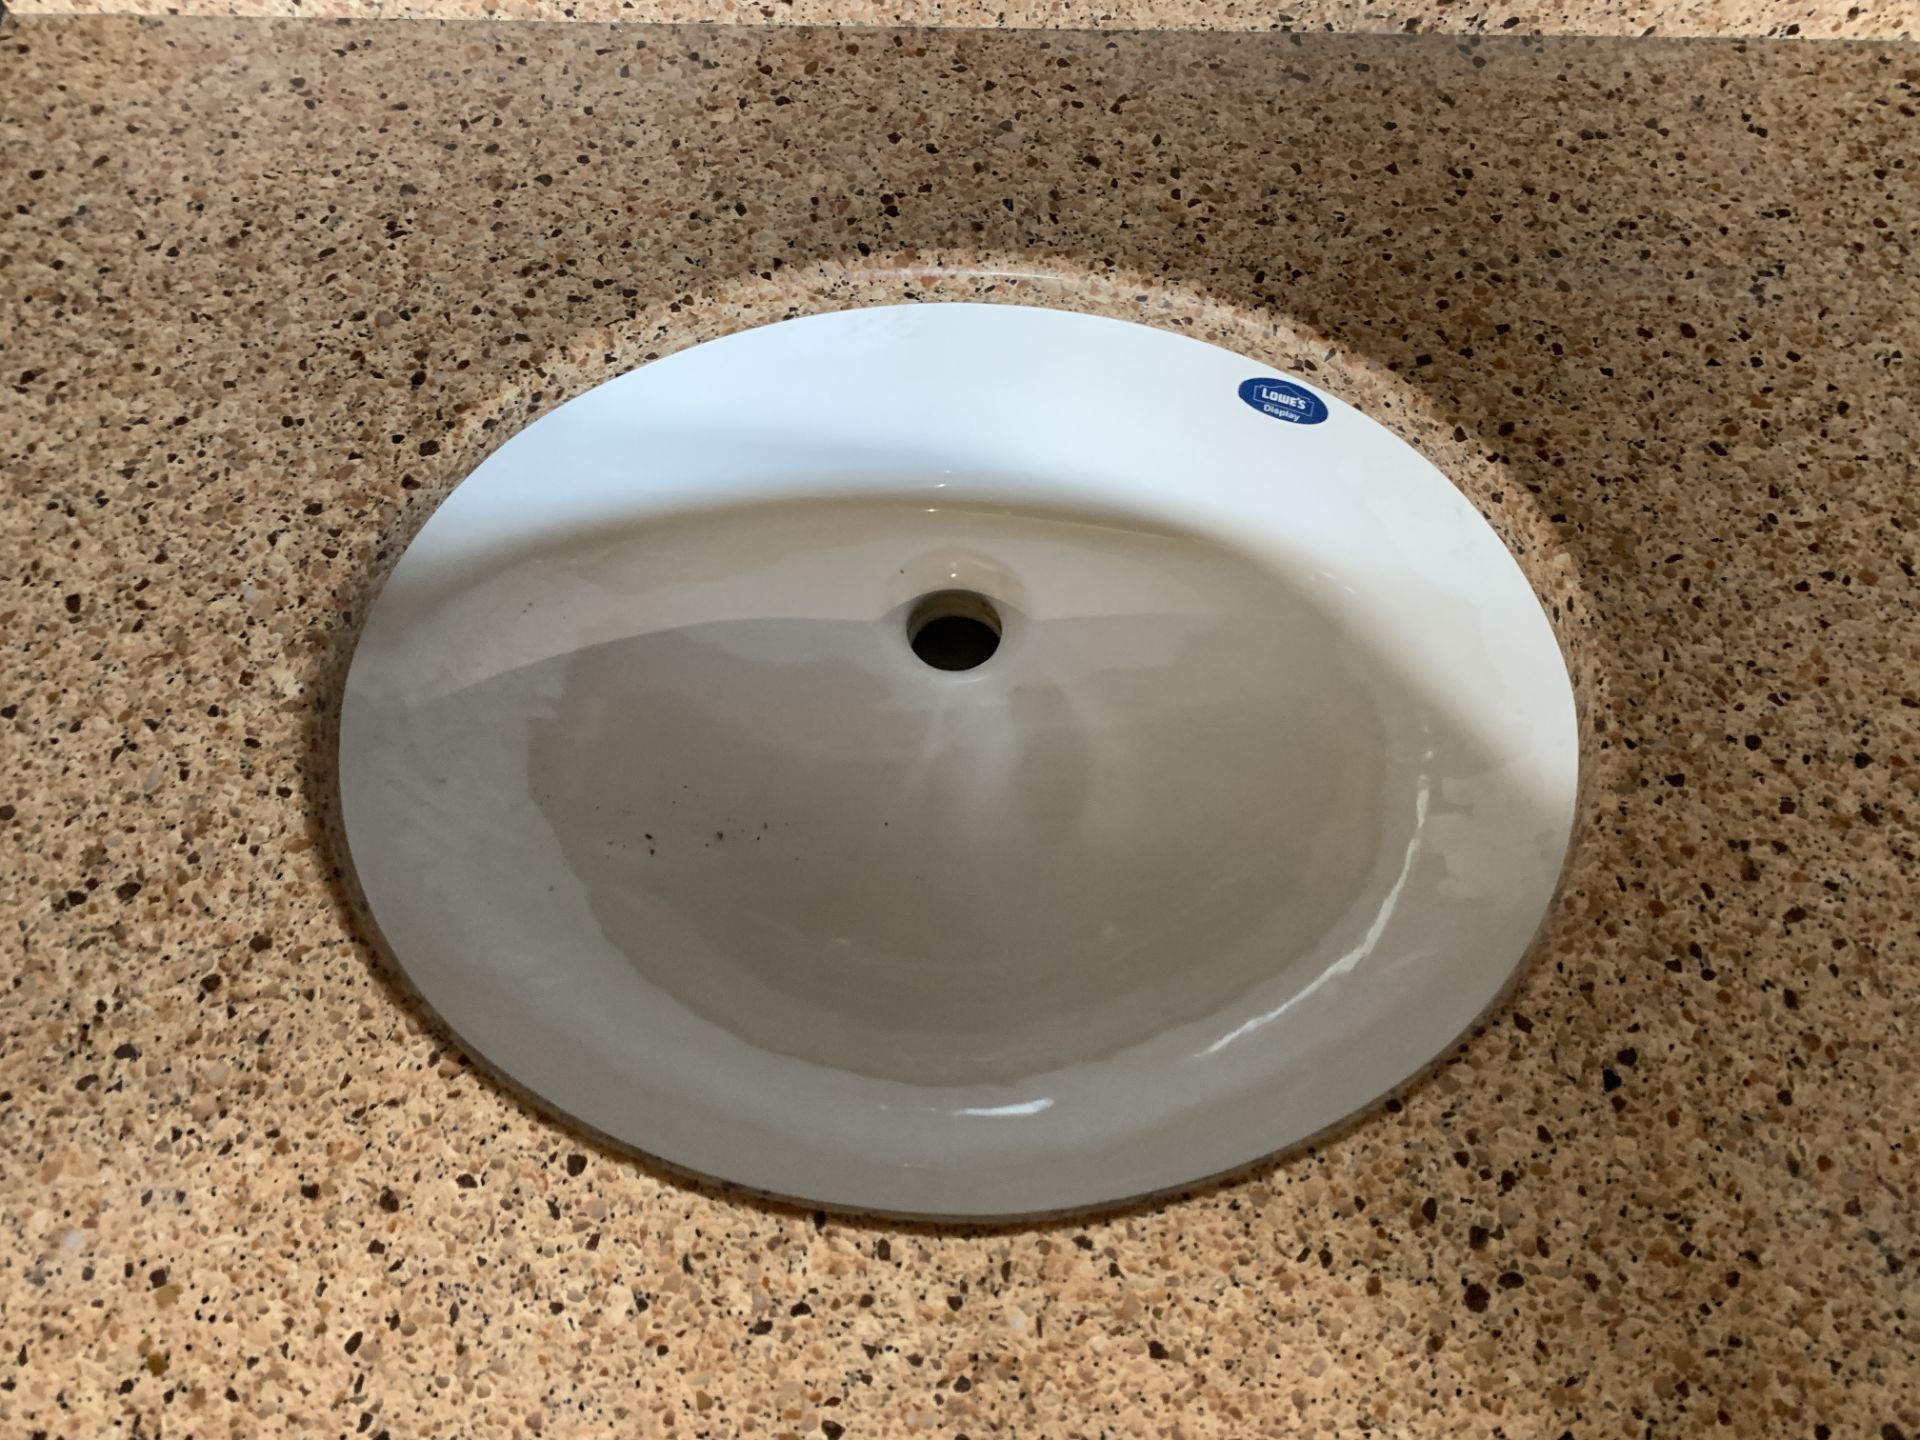 Lowes Quartz Stone Countertop and Sink, Install Ready, 32"x24" - Sand - Image 3 of 4